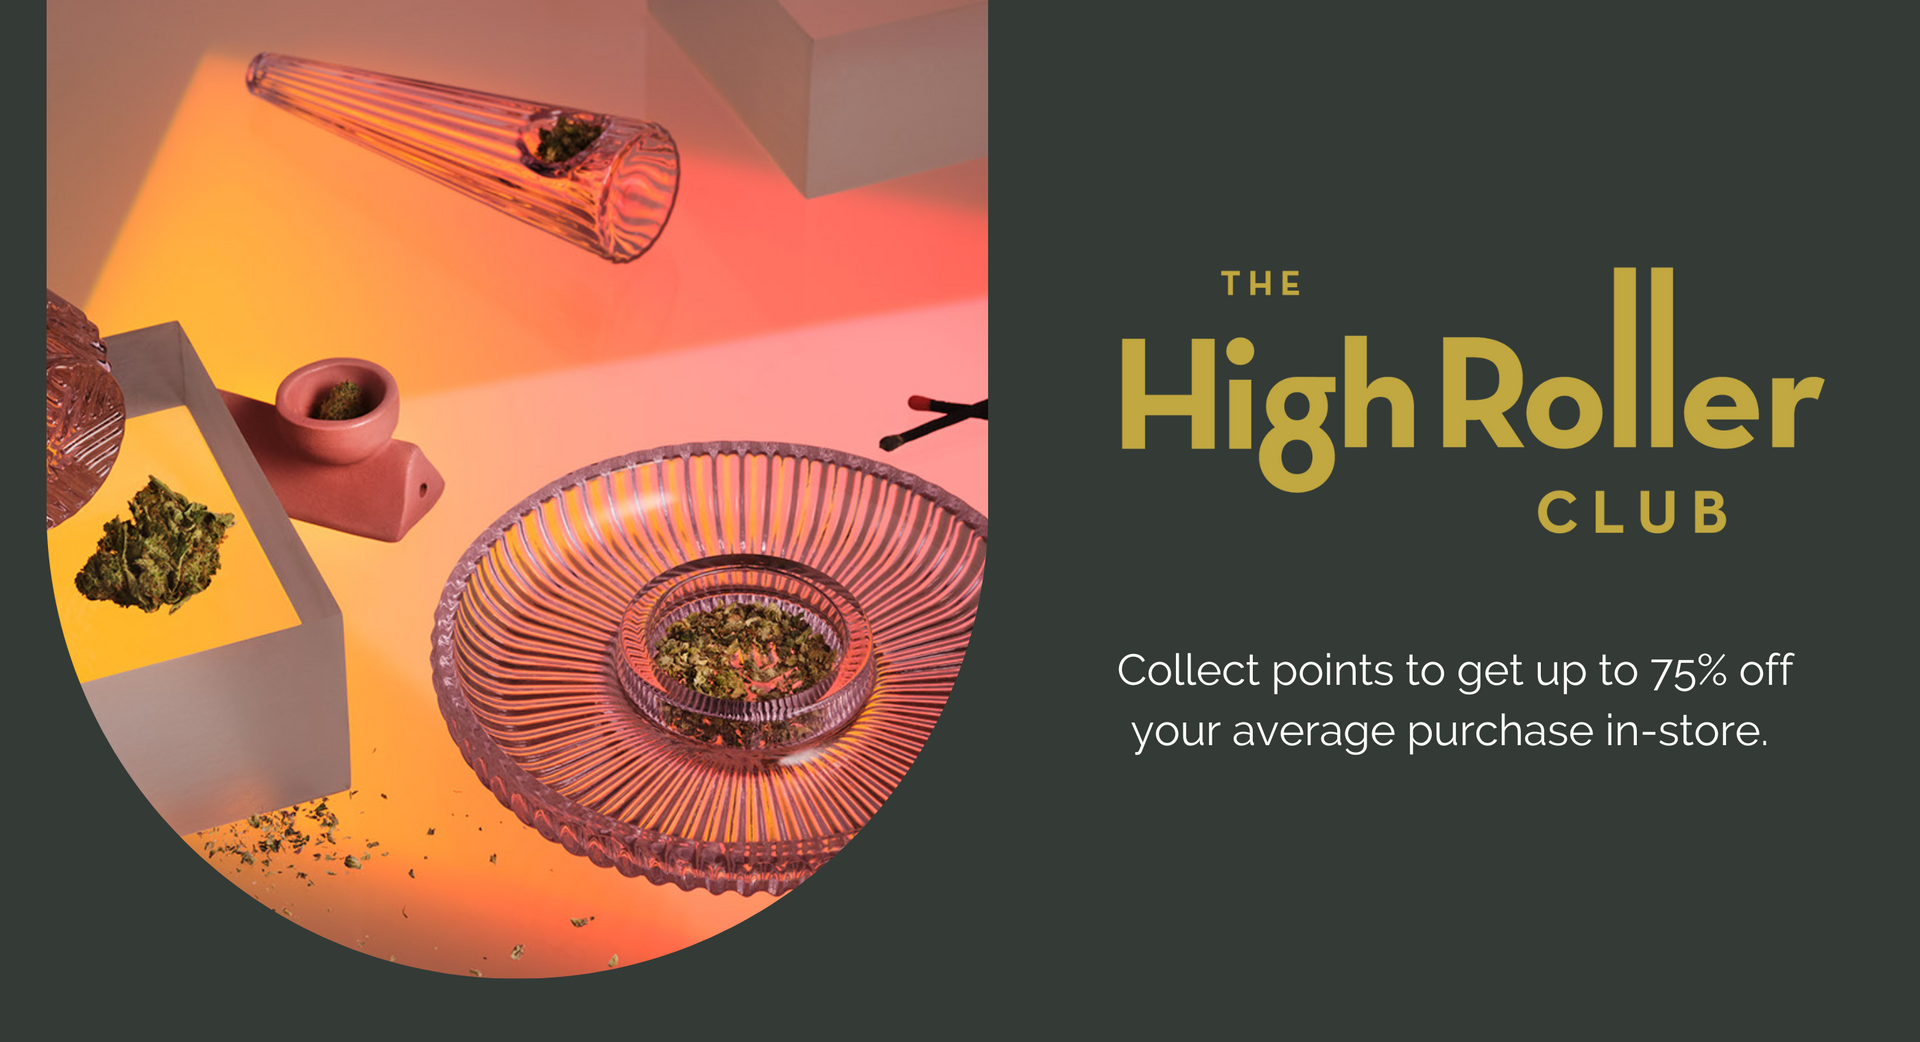 The High Roller Club. Collect points to get up to 75% off your average purchase in-store.